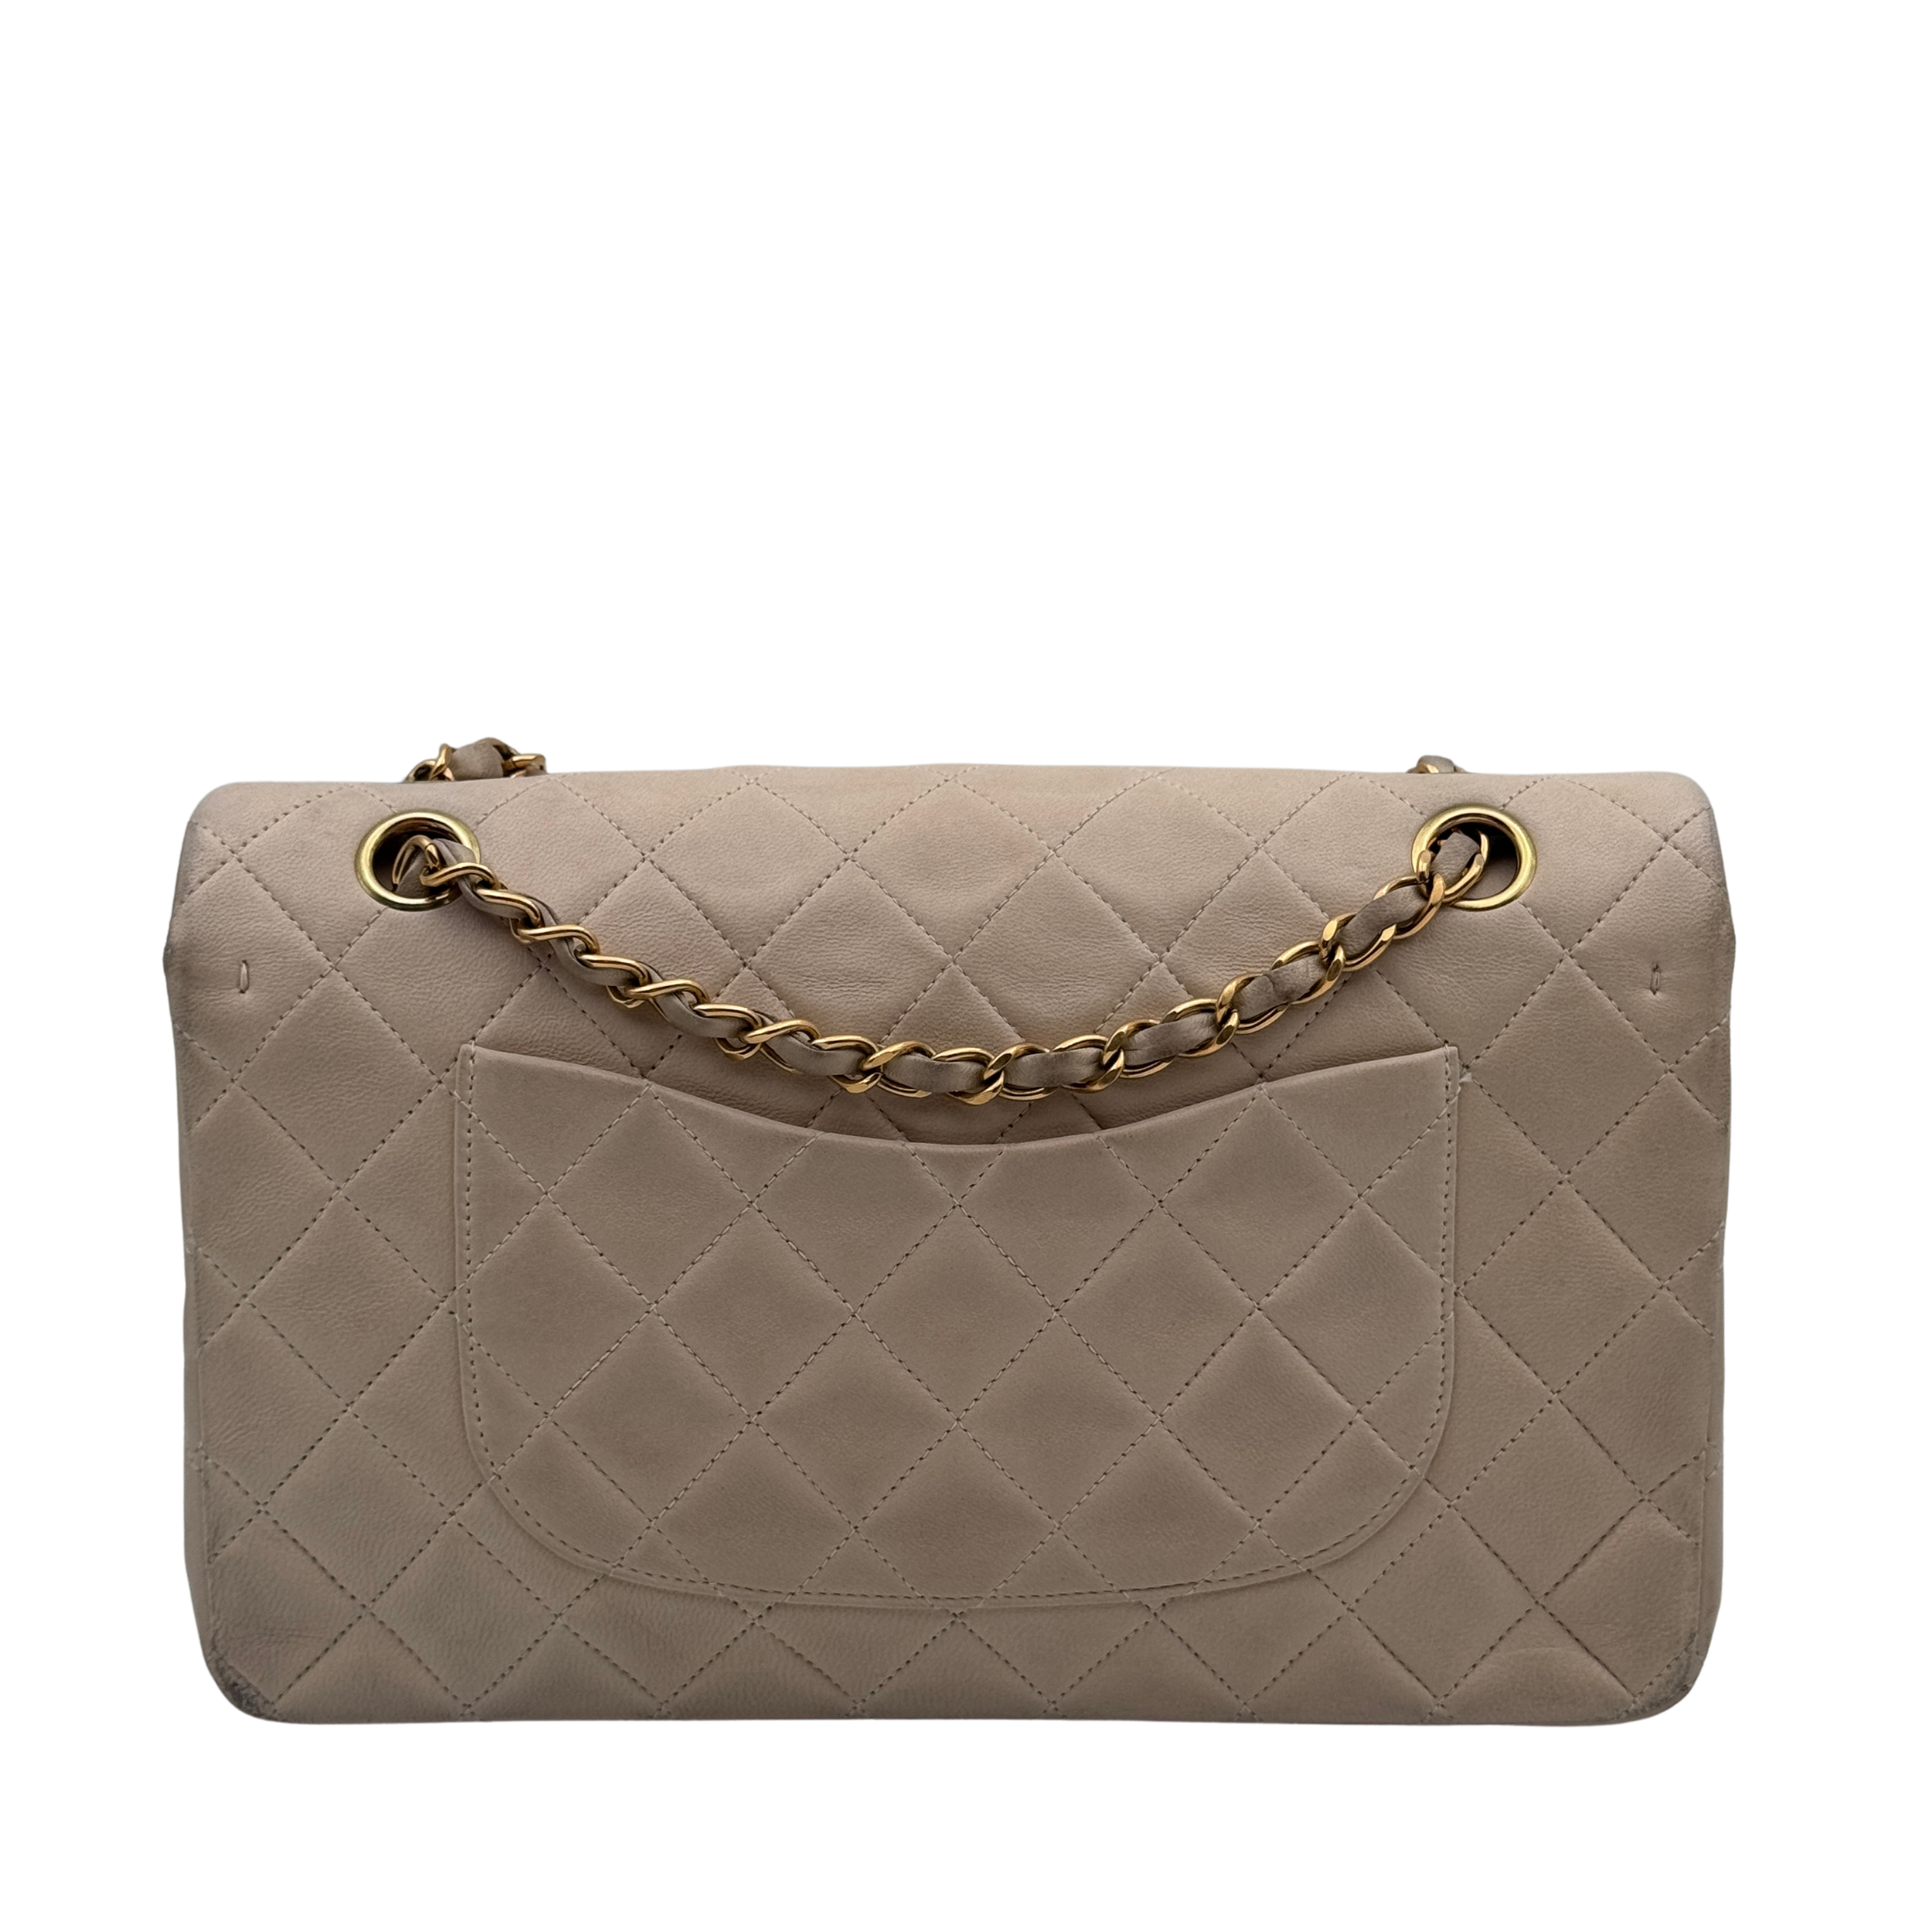 CLASSIC TIMELESS MEDIUM DOUBLE FLAP - CHANEL Lola Collective